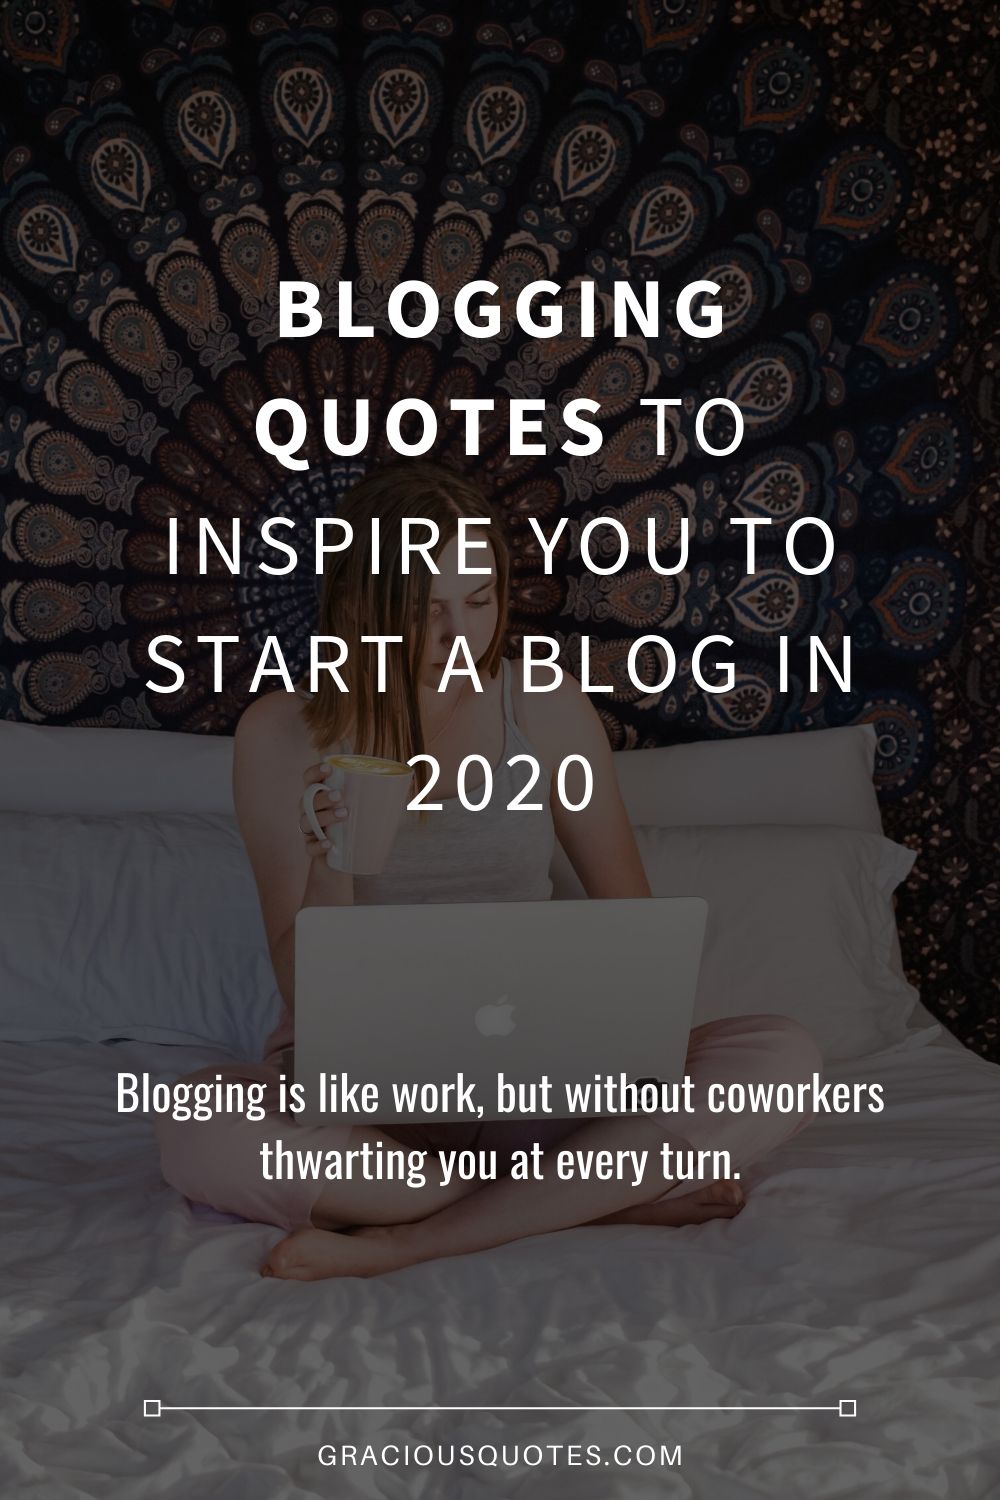 Blogging-Quotes-to-Inspire-You-to-Start-a-Blog-in-2020-Gracious-Quotes